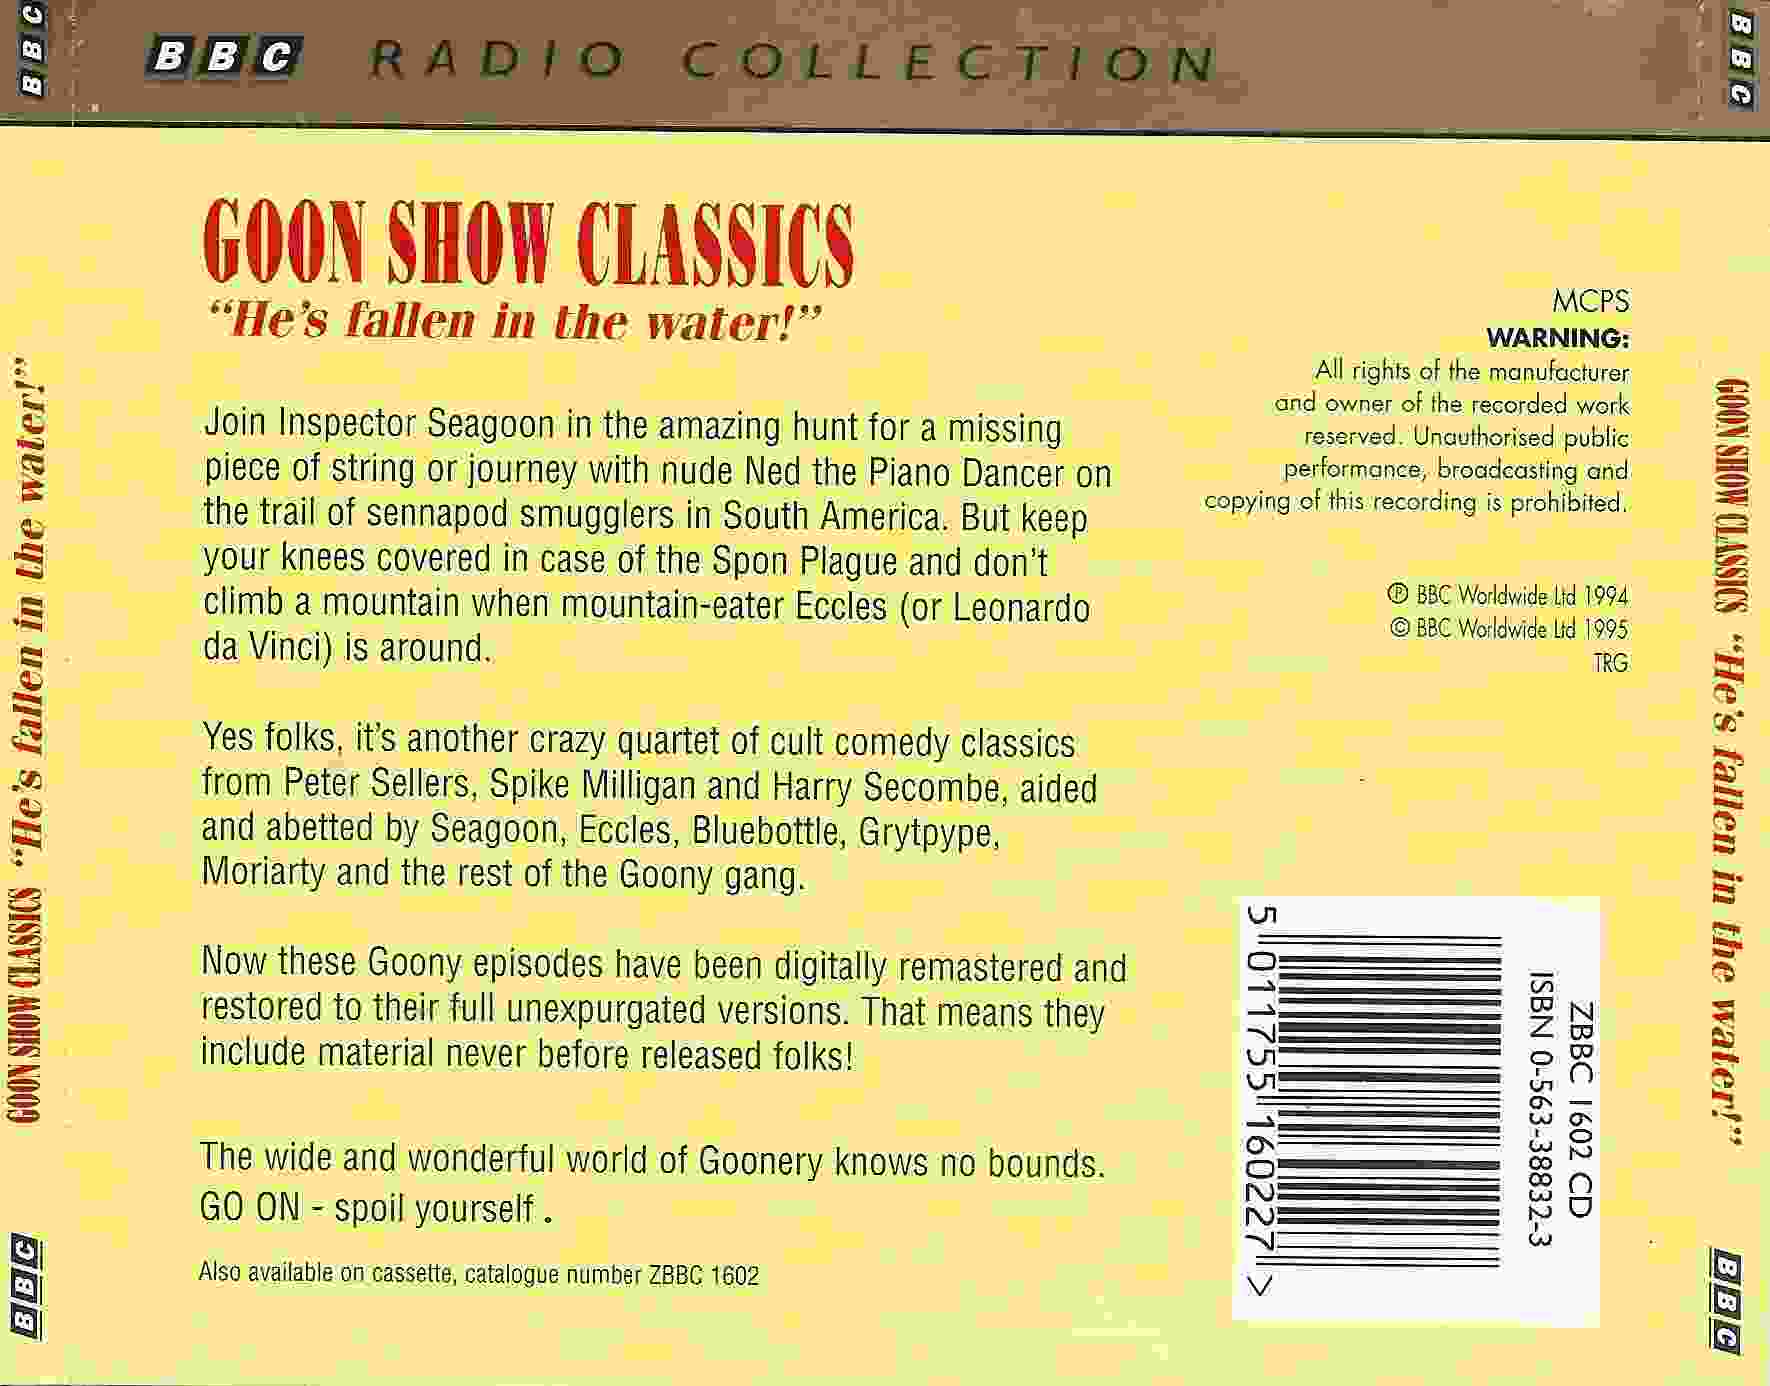 Picture of ZBBC 1602 CD Goon show classics 11 - He's fallen in the water by artist Spike Milligan / Larry Stephens from the BBC records and Tapes library